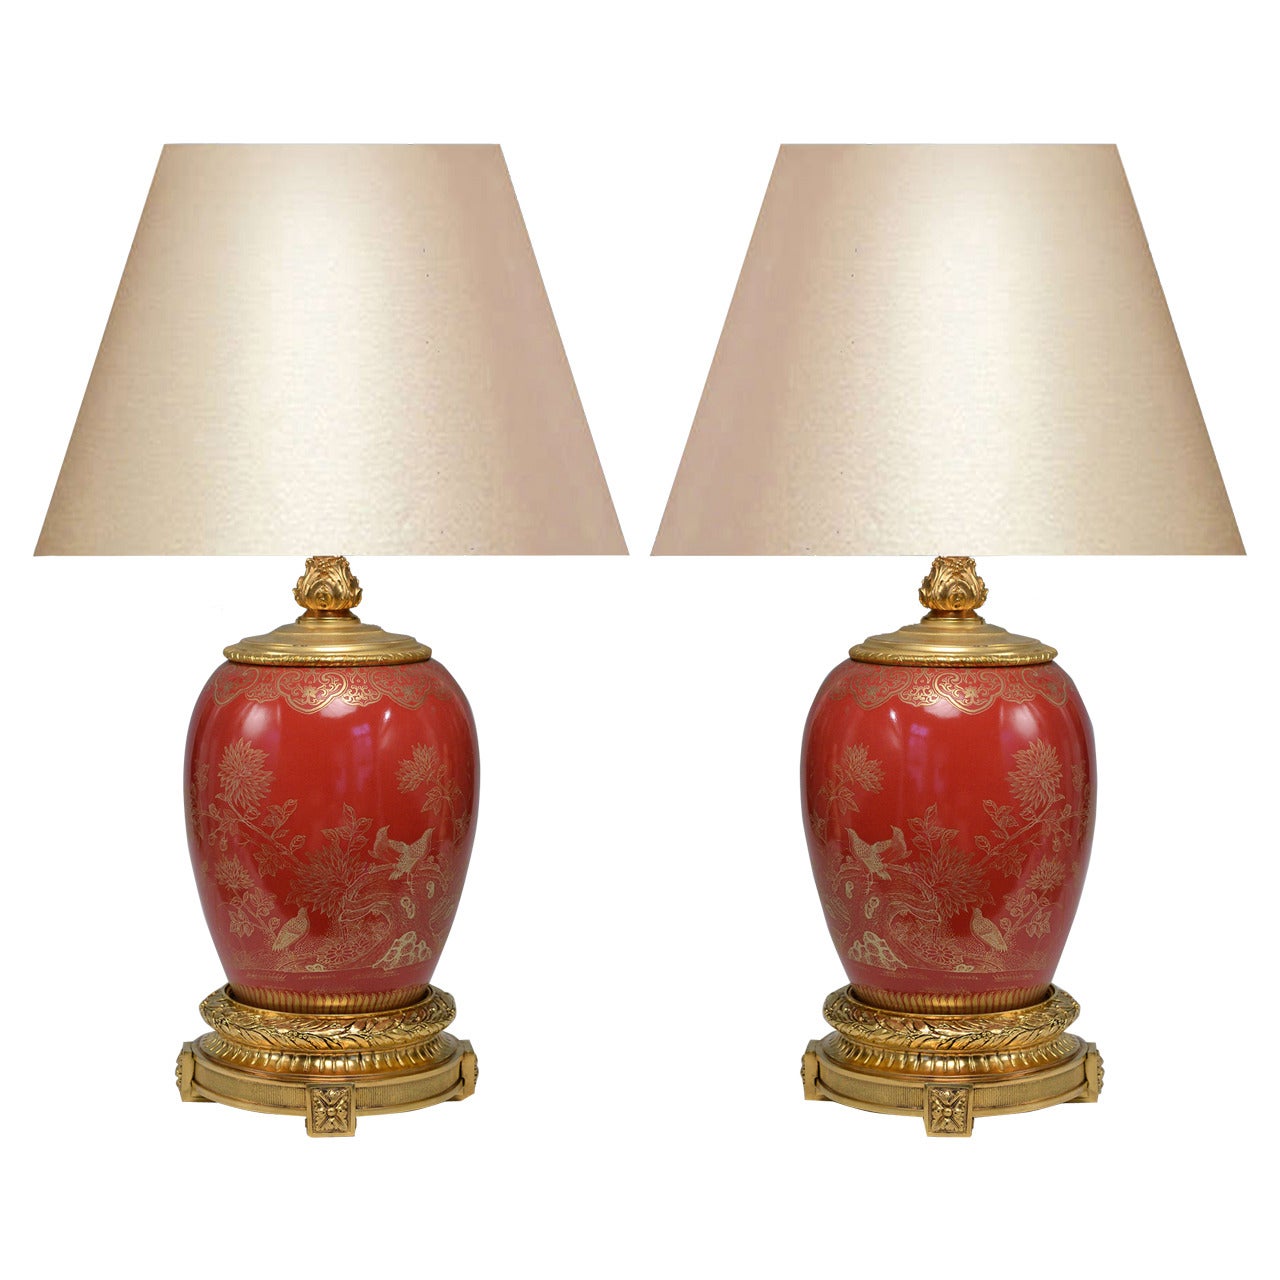 Pair of Ormolu-Mounted Red Porcelain Lamps